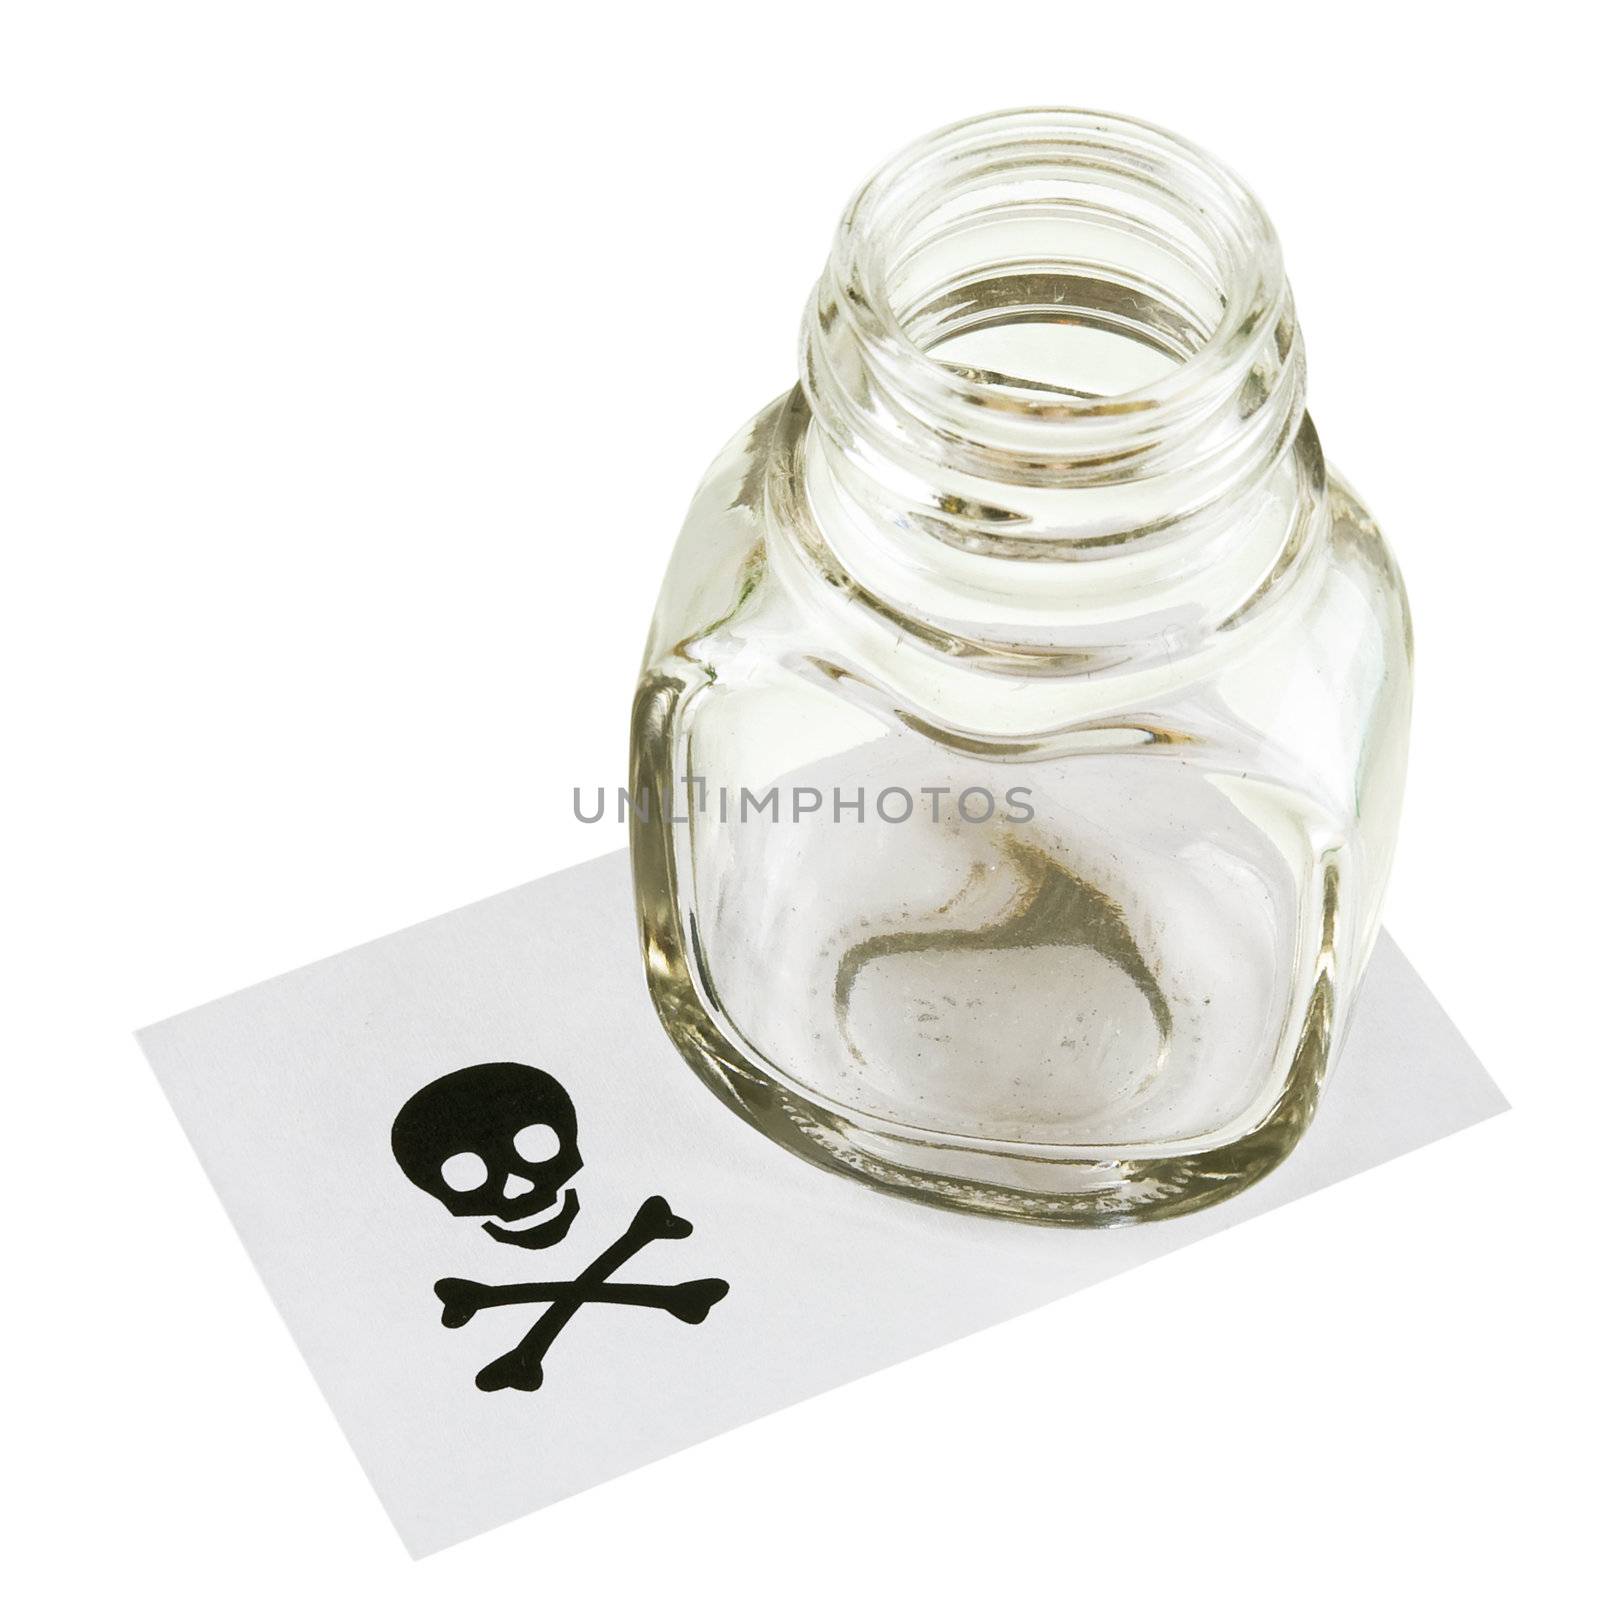 Empty glass jar costing on sheet to paper with scene skull and crossbones